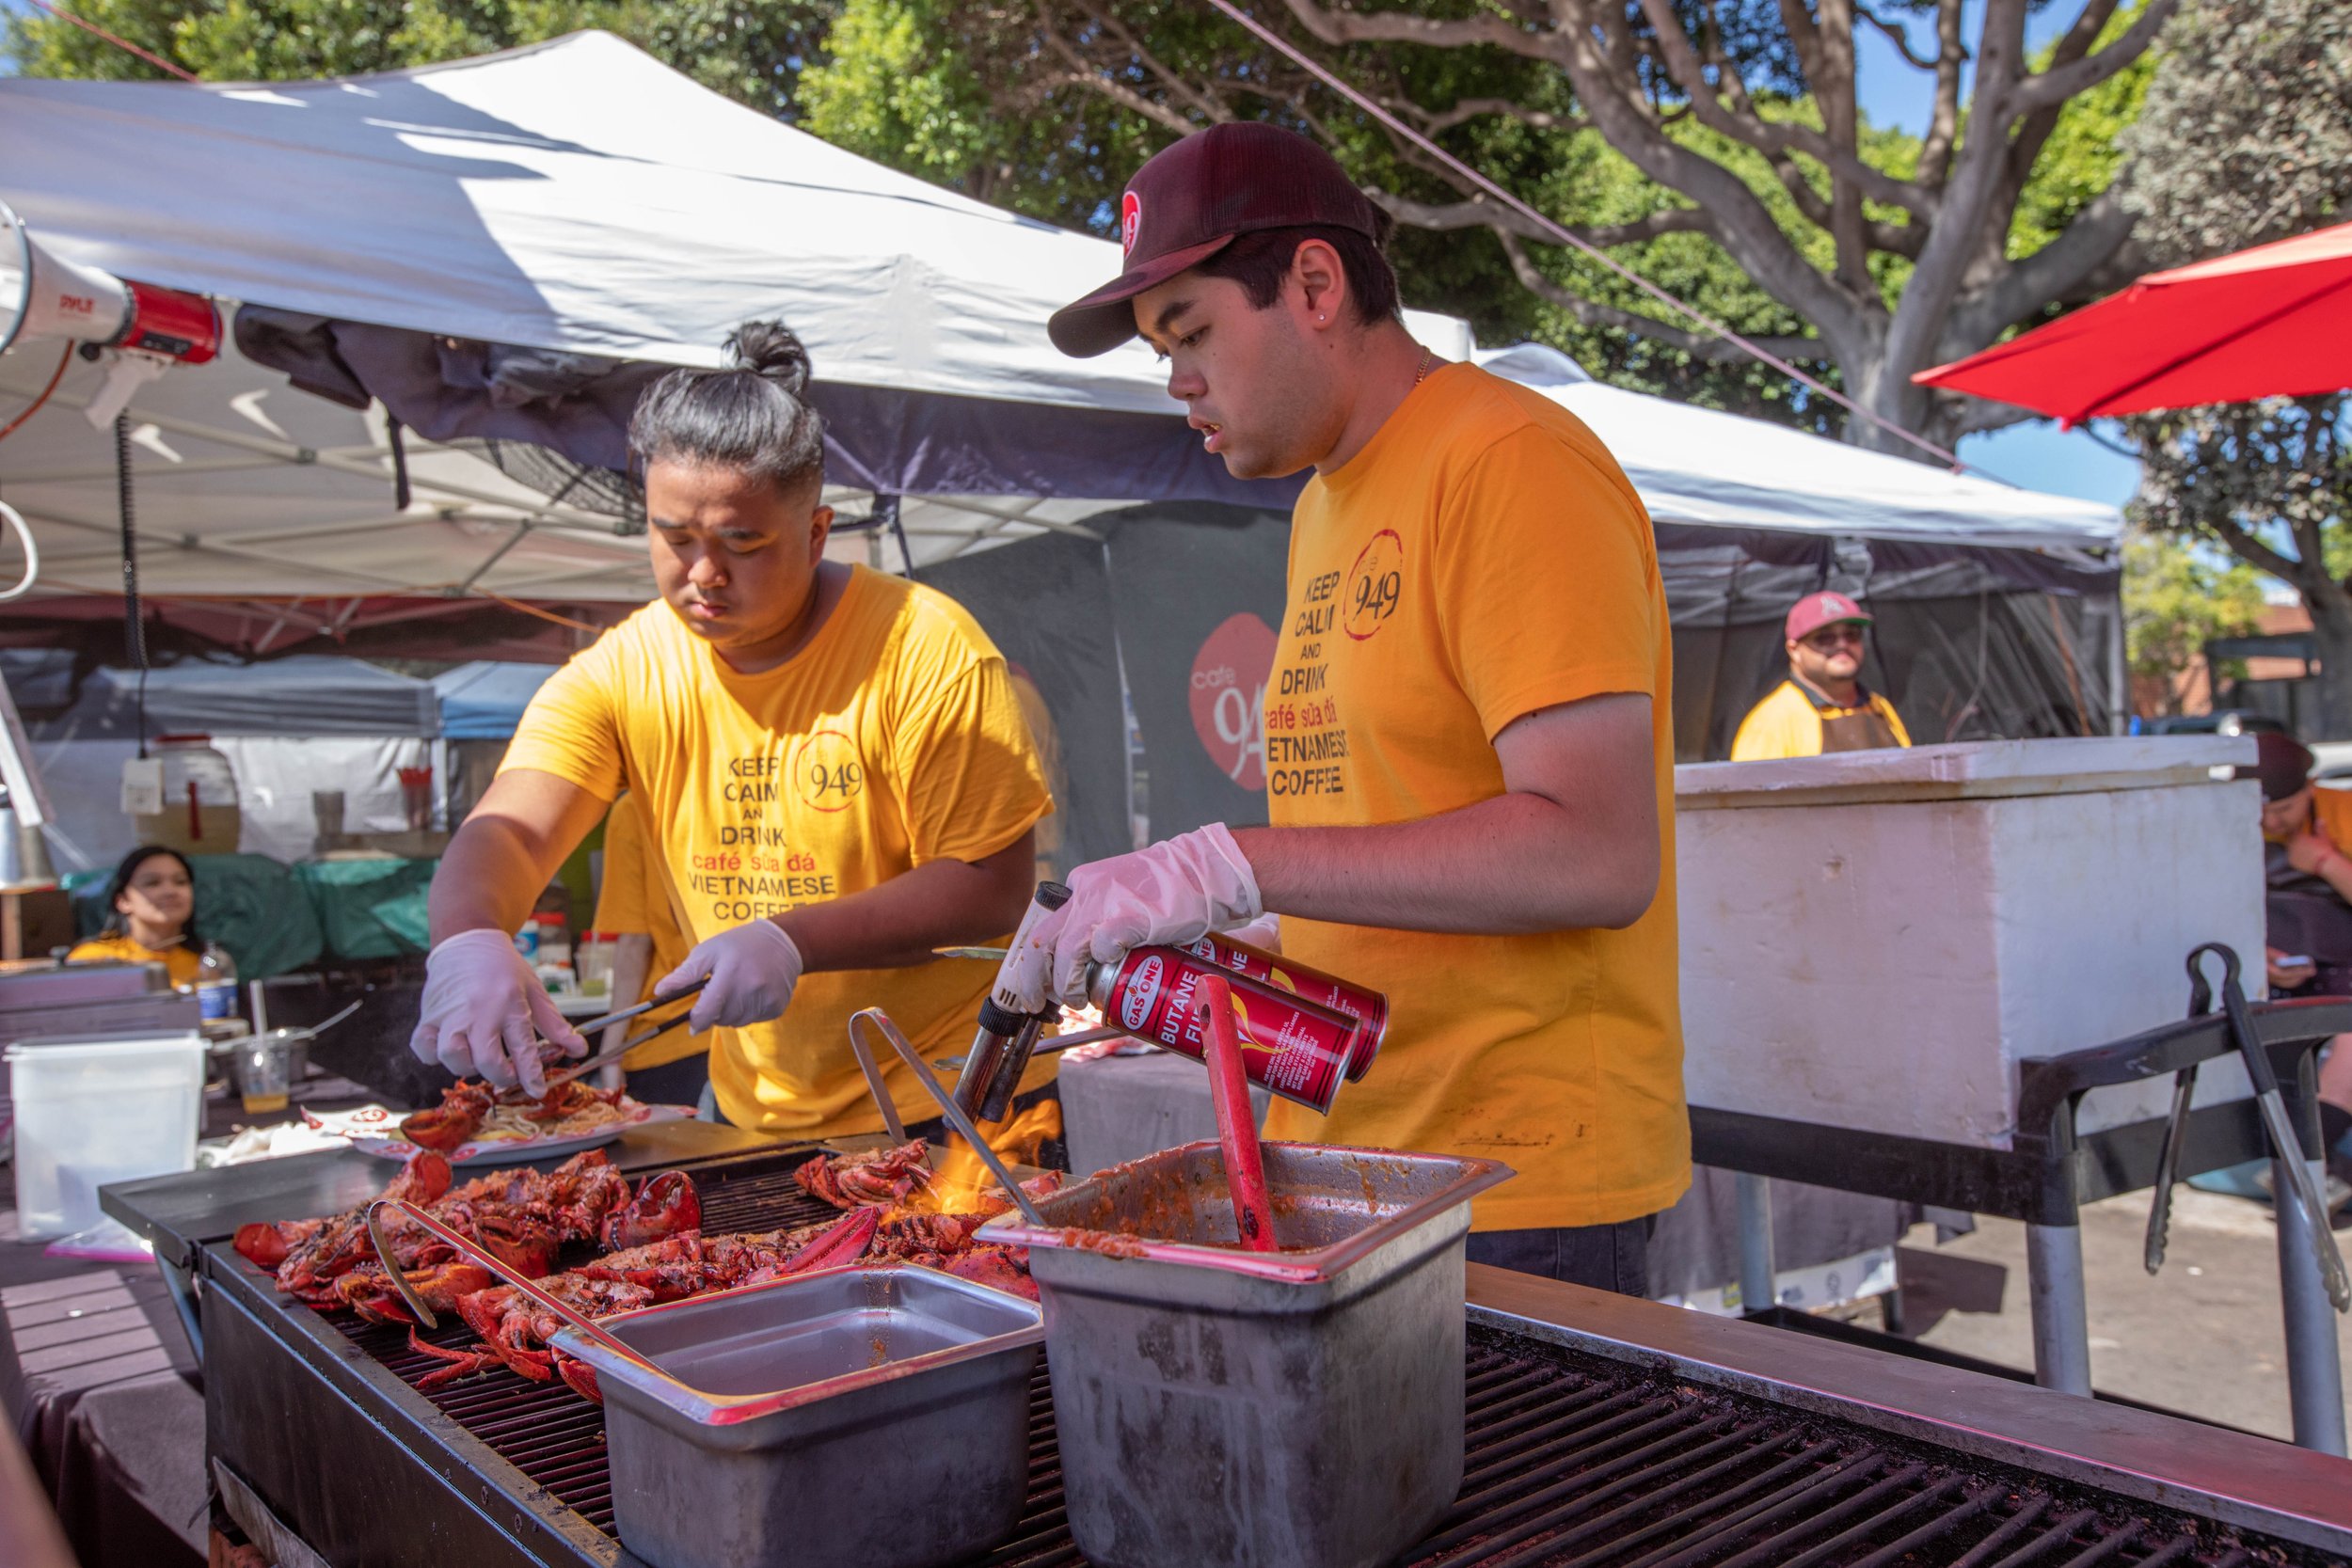  The crew of the Vietnamese vendor Cafe 949 prepares a grilled lobster dish. Inspired by famous nighttime bazaars of Asia, 626 Night Market Mini was established in 2012, this large-scale market is named after the 626 area code region of San Gabriel V